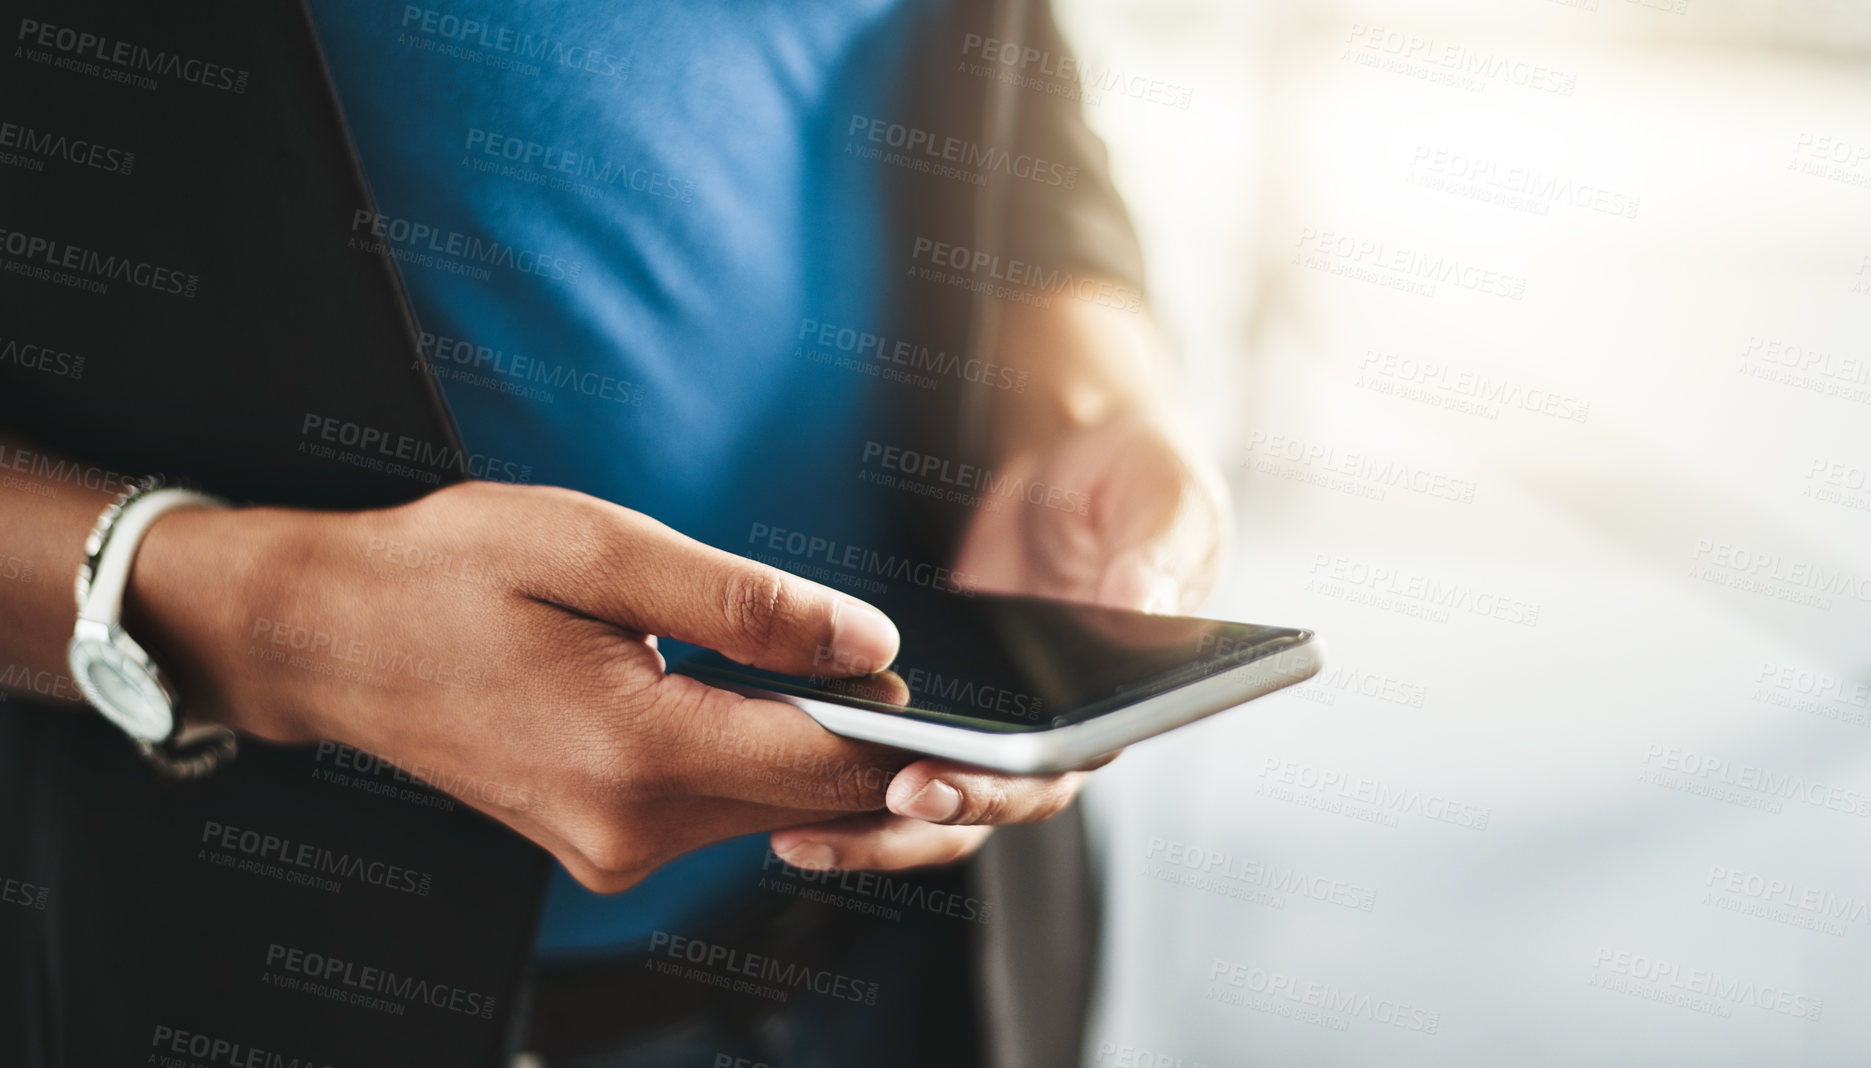 Buy stock photo Businesswoman texting on phone, networking on social media and browsing internet at work. Closeup of the hands of a professional employee checking a text, scrolling an online app and reading messages